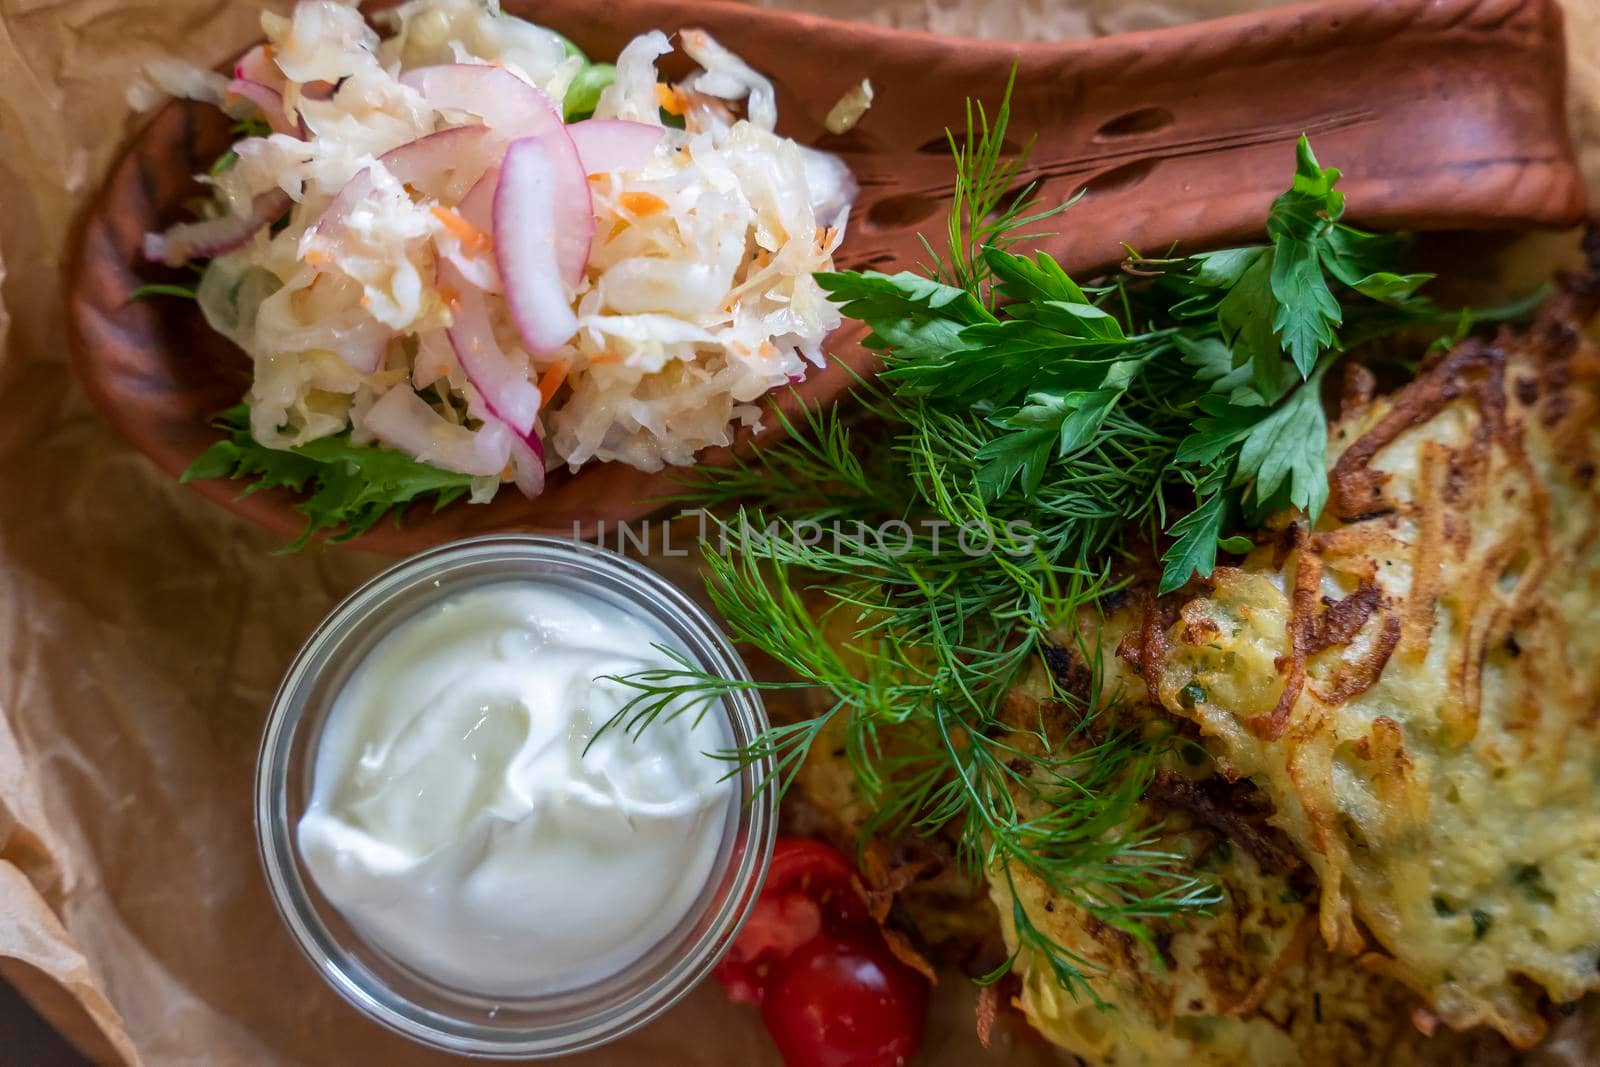 Draniki served with sour cream, herbs and sauerkraut in the restaurant. Potato pancakes (draniki) in a plate on a wooden table.Close-up, selective focusing